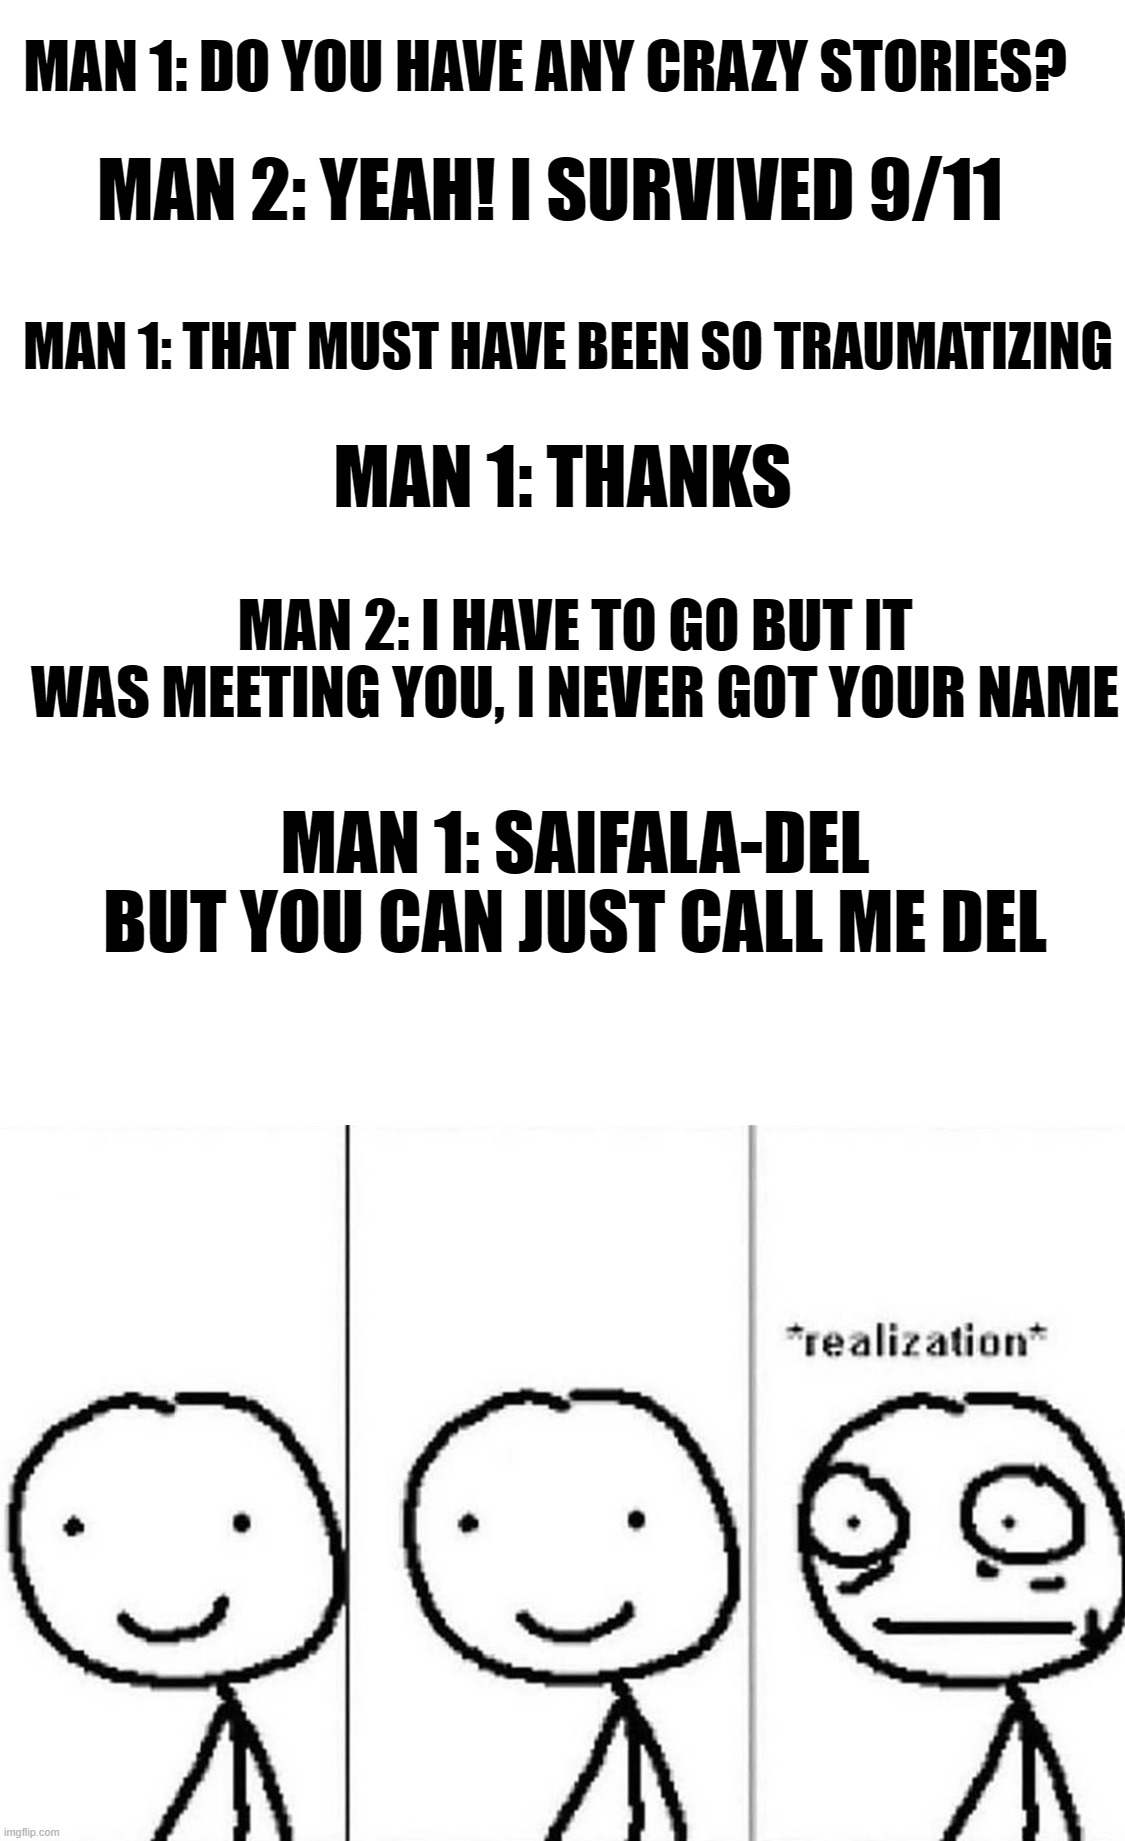 MAN 1: DO YOU HAVE ANY CRAZY STORIES? MAN 2: YEAH! I SURVIVED 9/11; MAN 1: THAT MUST HAVE BEEN SO TRAUMATIZING; MAN 1: THANKS; MAN 2: I HAVE TO GO BUT IT WAS MEETING YOU, I NEVER GOT YOUR NAME; MAN 1: SAIFALA-DEL BUT YOU CAN JUST CALL ME DEL | image tagged in memes,blank transparent square,realization | made w/ Imgflip meme maker